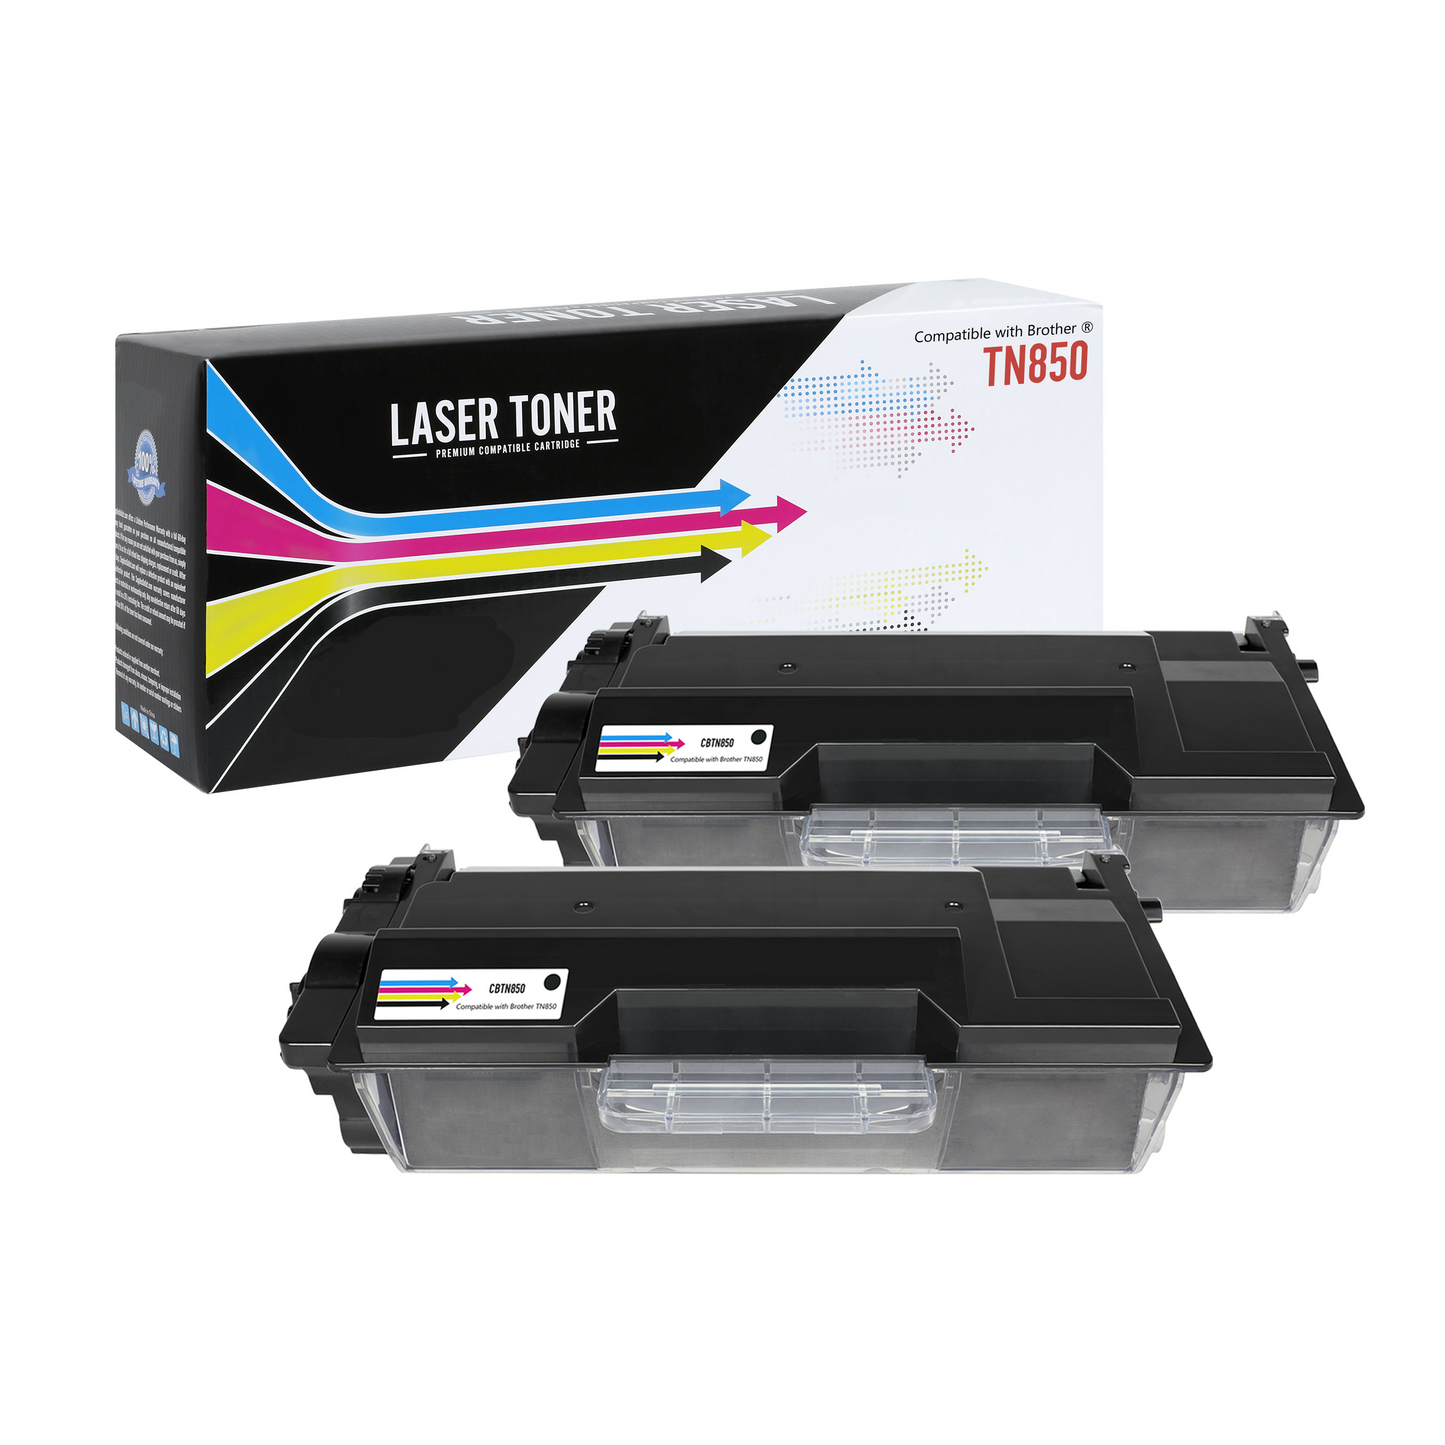 Compatible Brother TN-850 Black High Yield Toner Cartridge - 8000 Page Yield